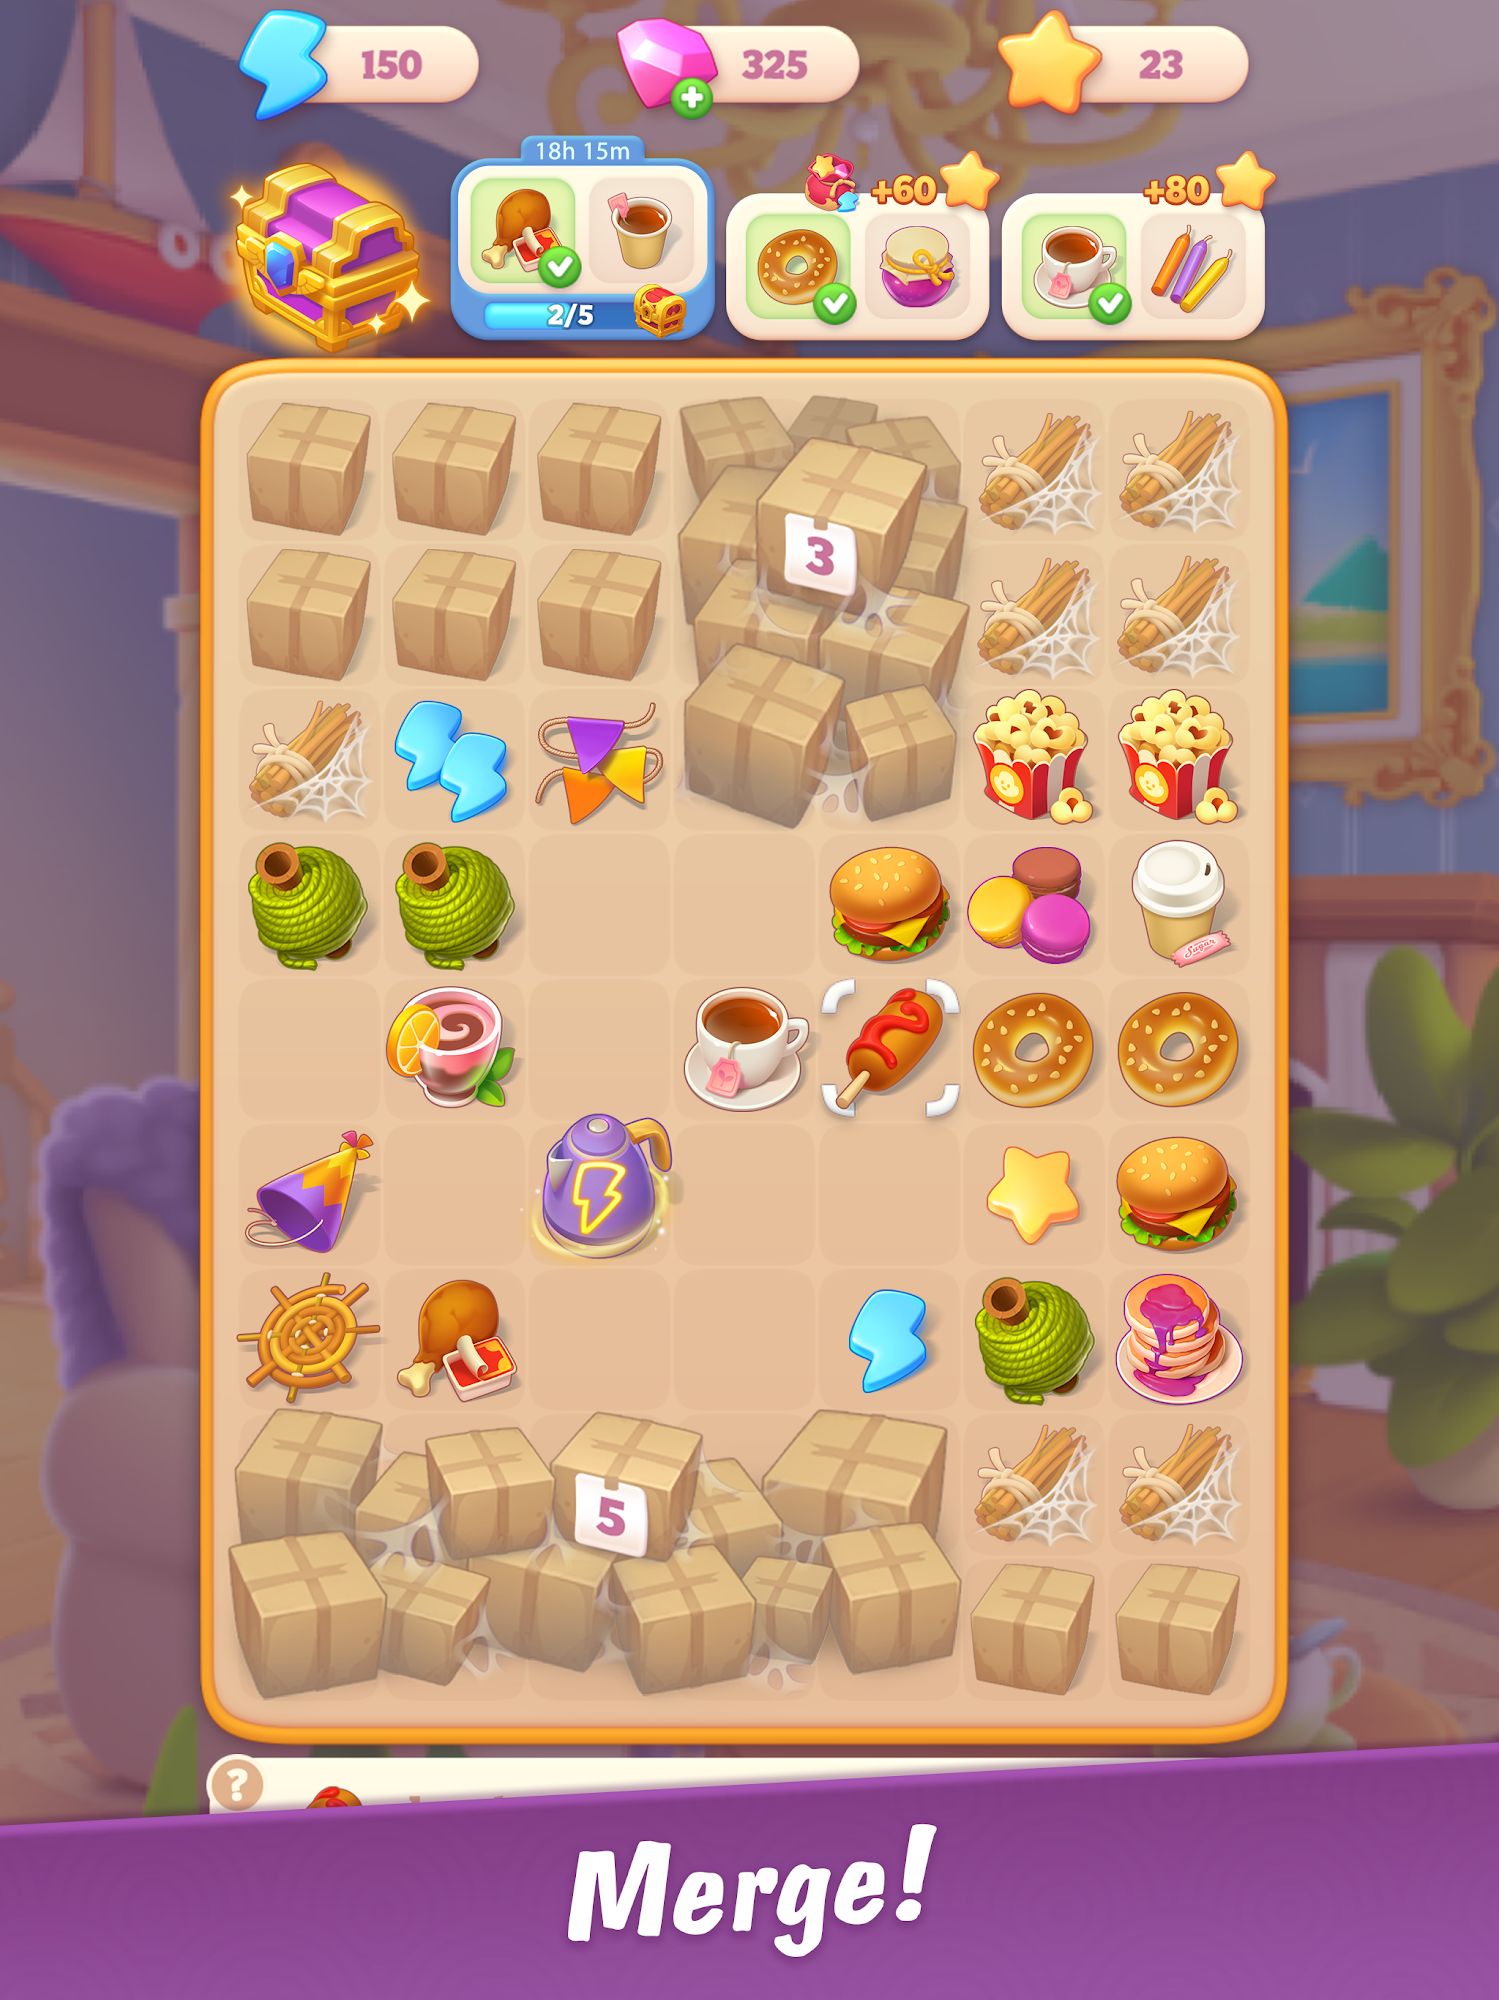 Full version of Android apk app Merge Hotel Empire: Design for tablet and phone.